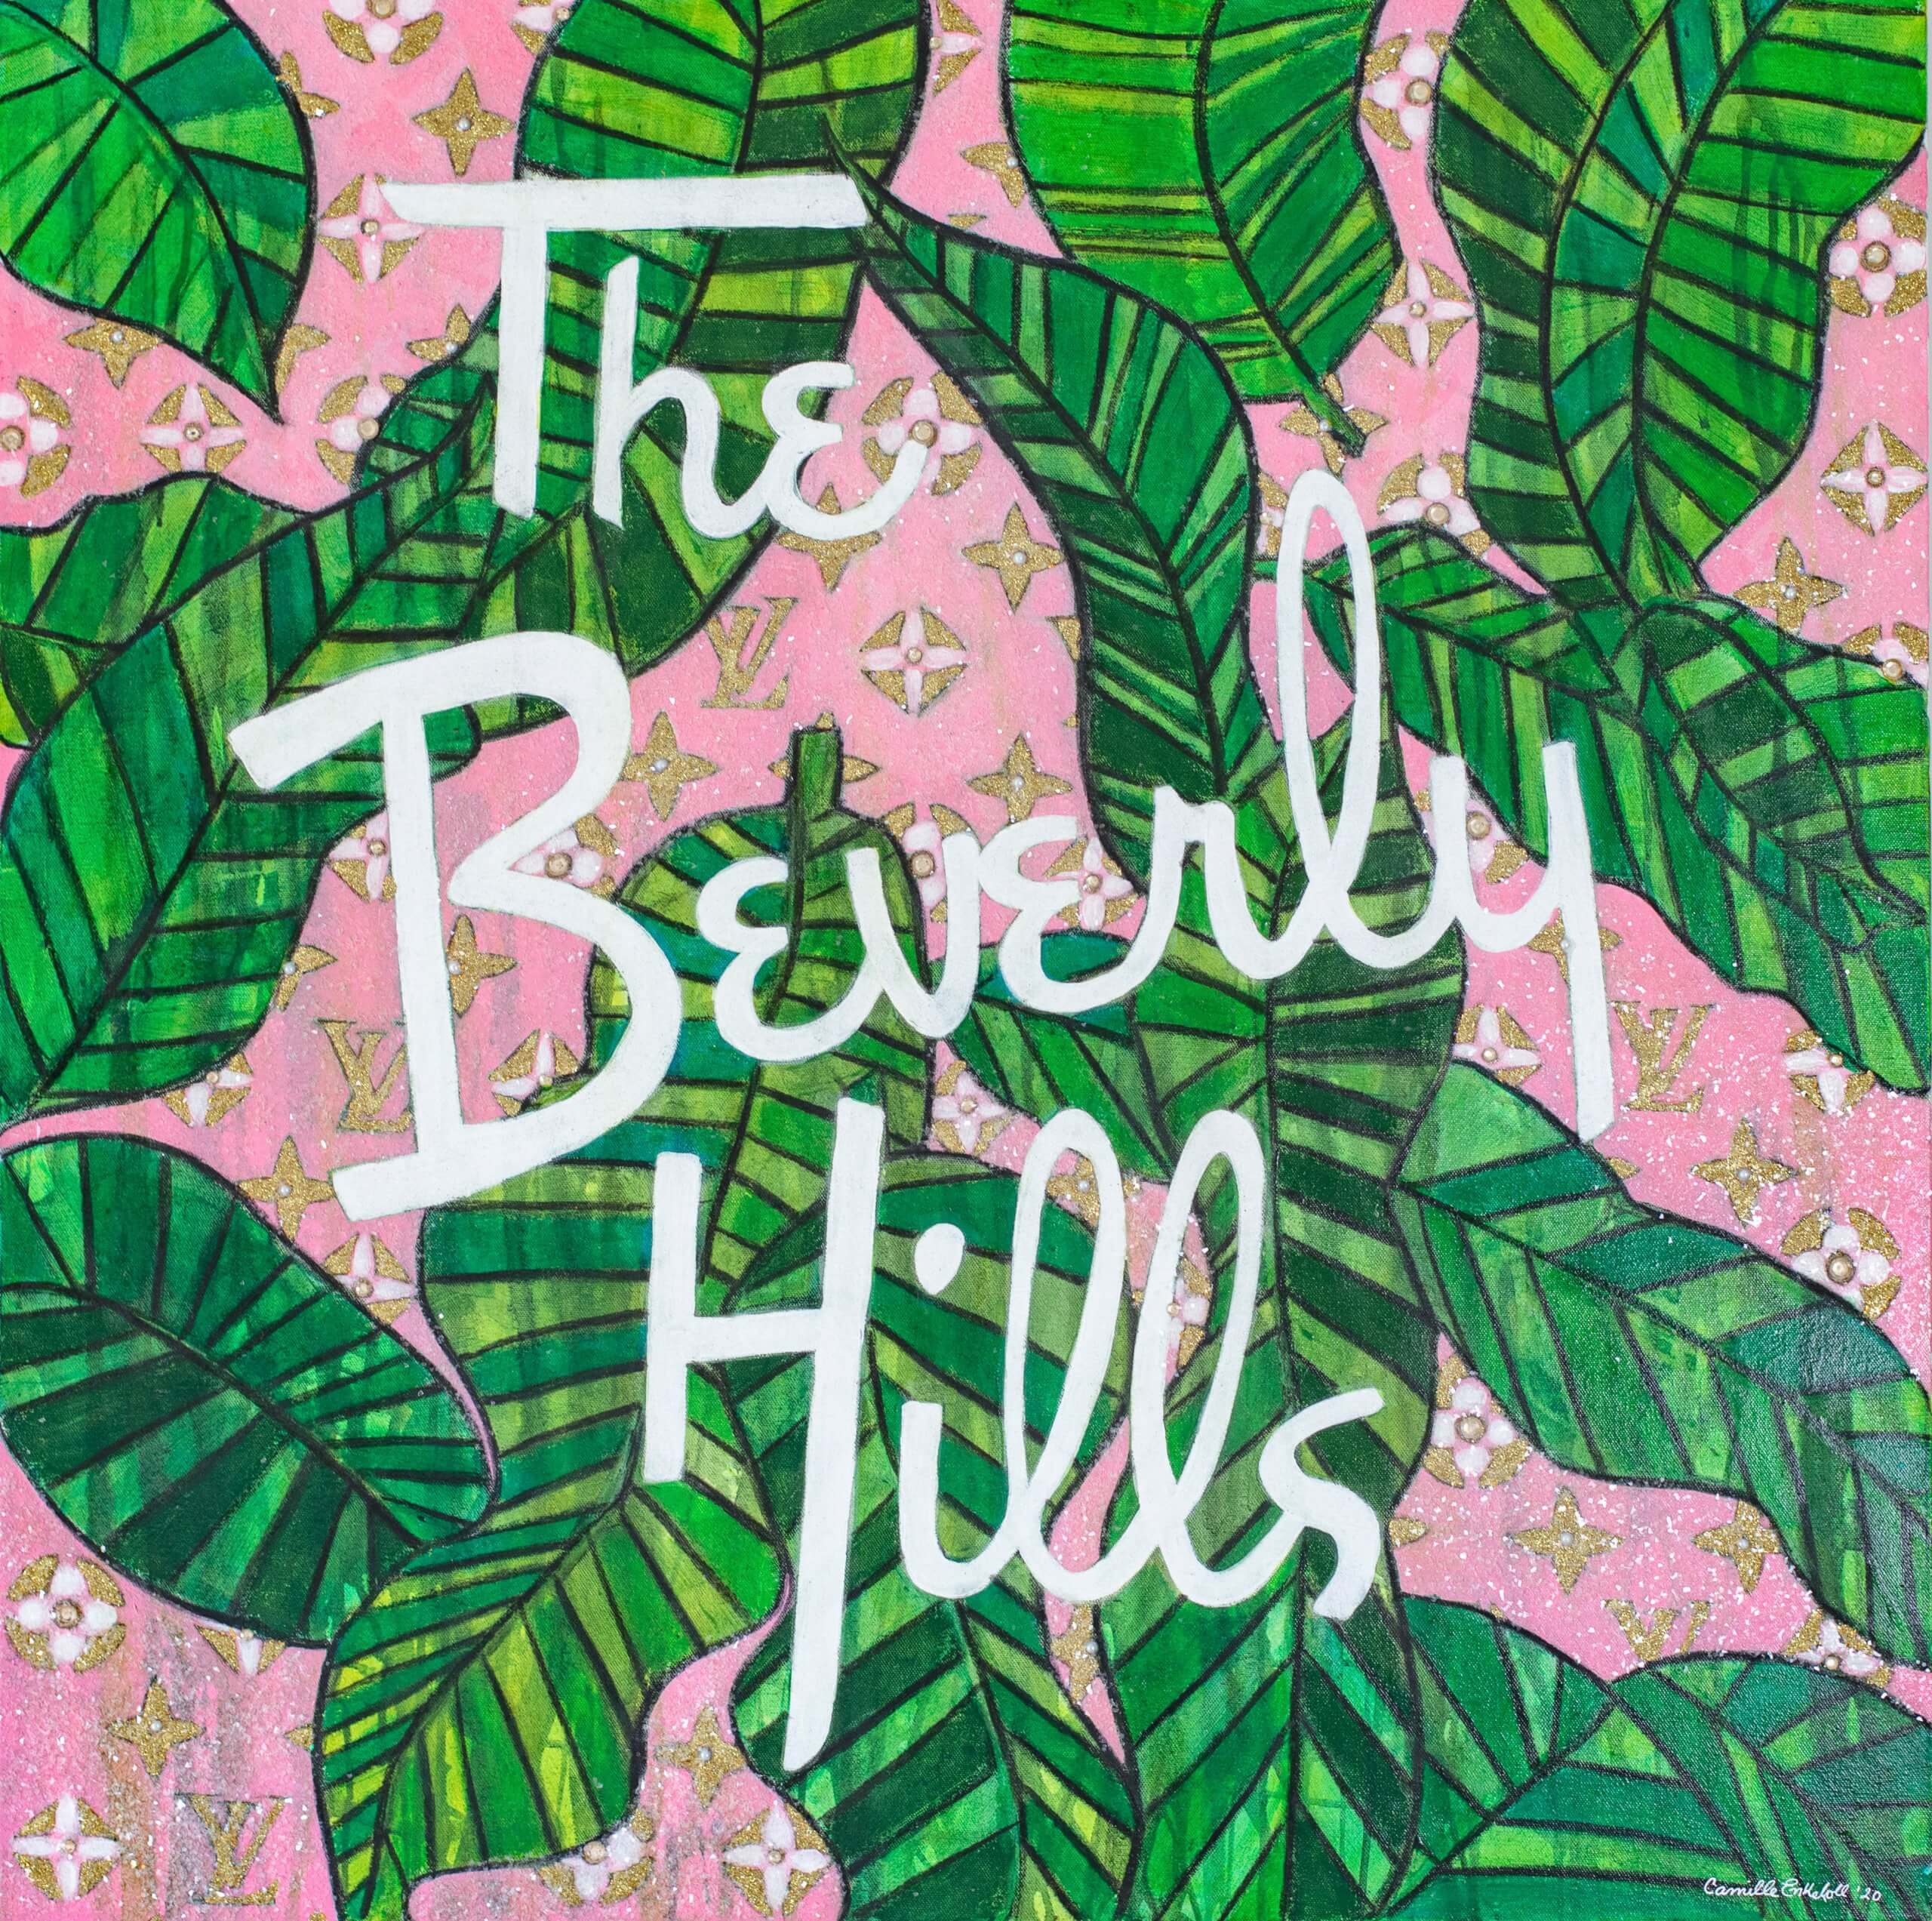 THE BEVERLY HILLS